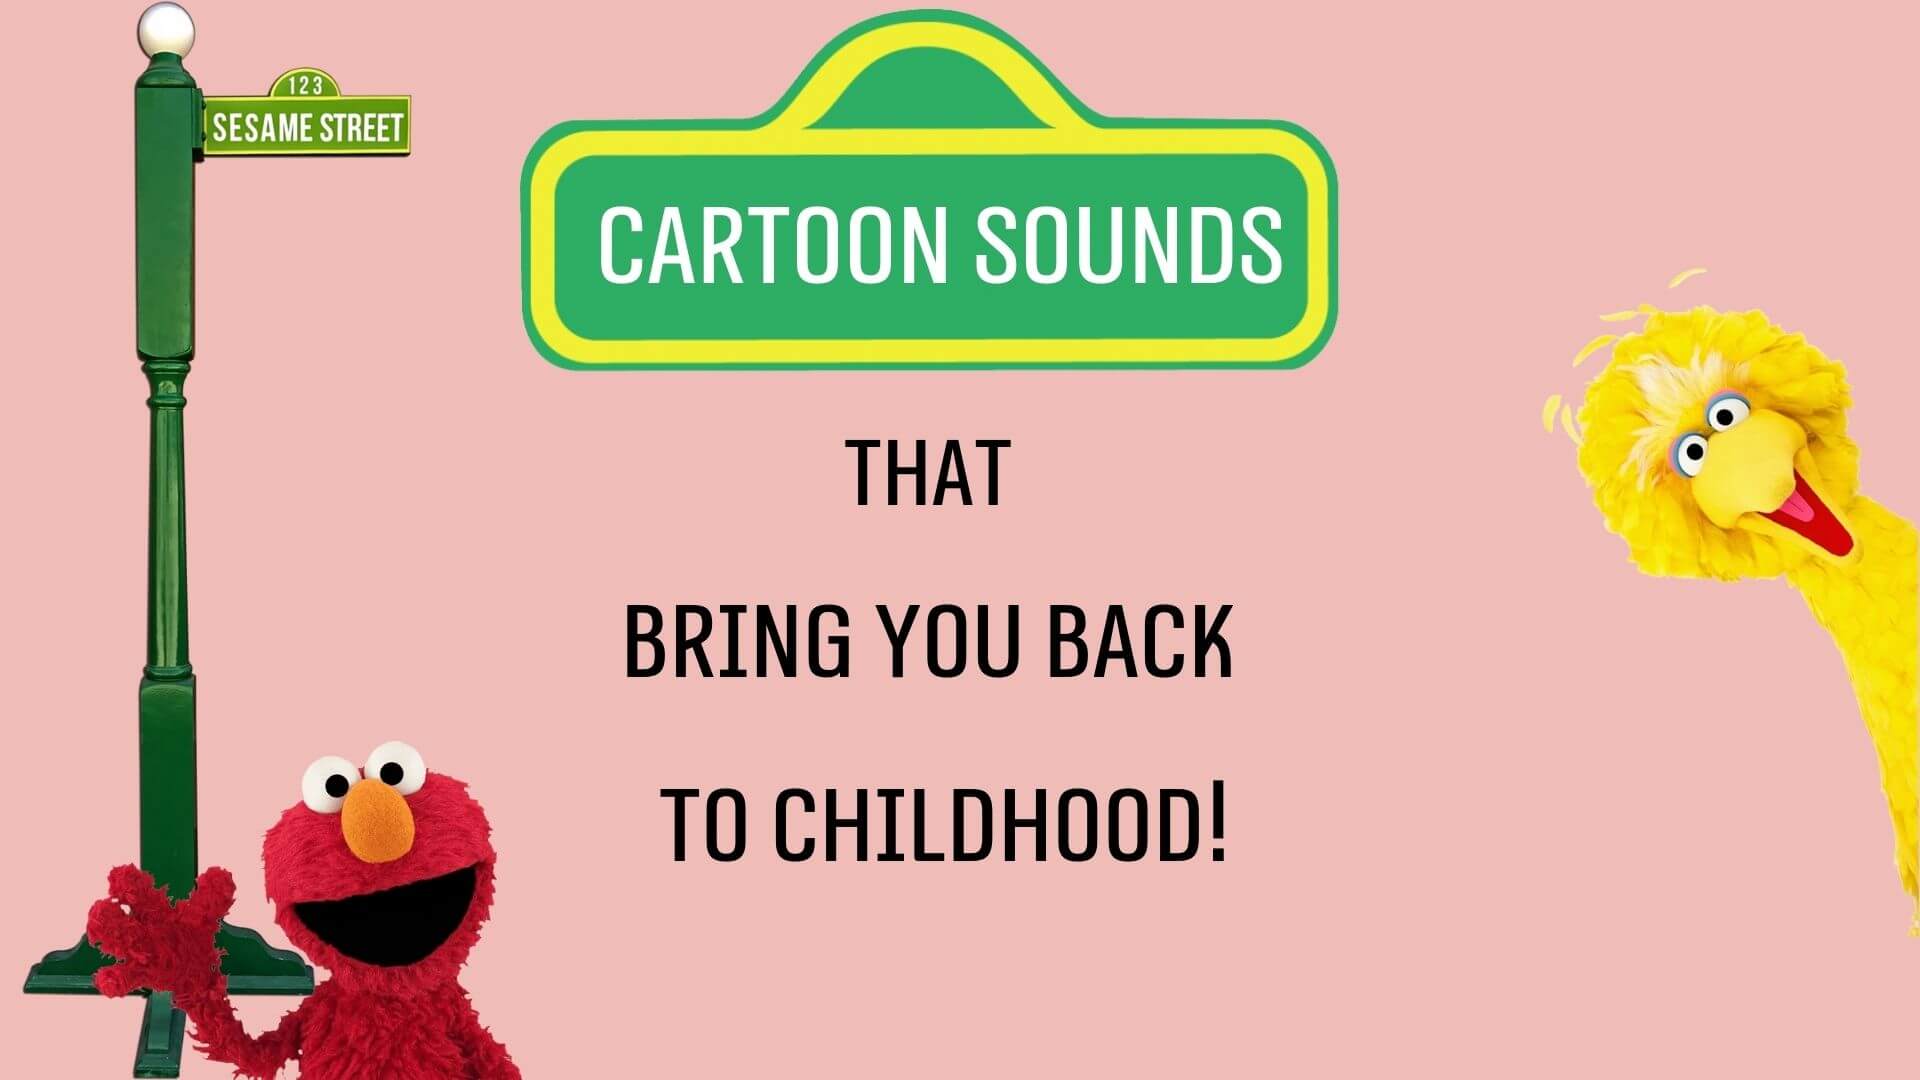 Top 4 Cartoon Sound Effects Bring You Back to Childhood!